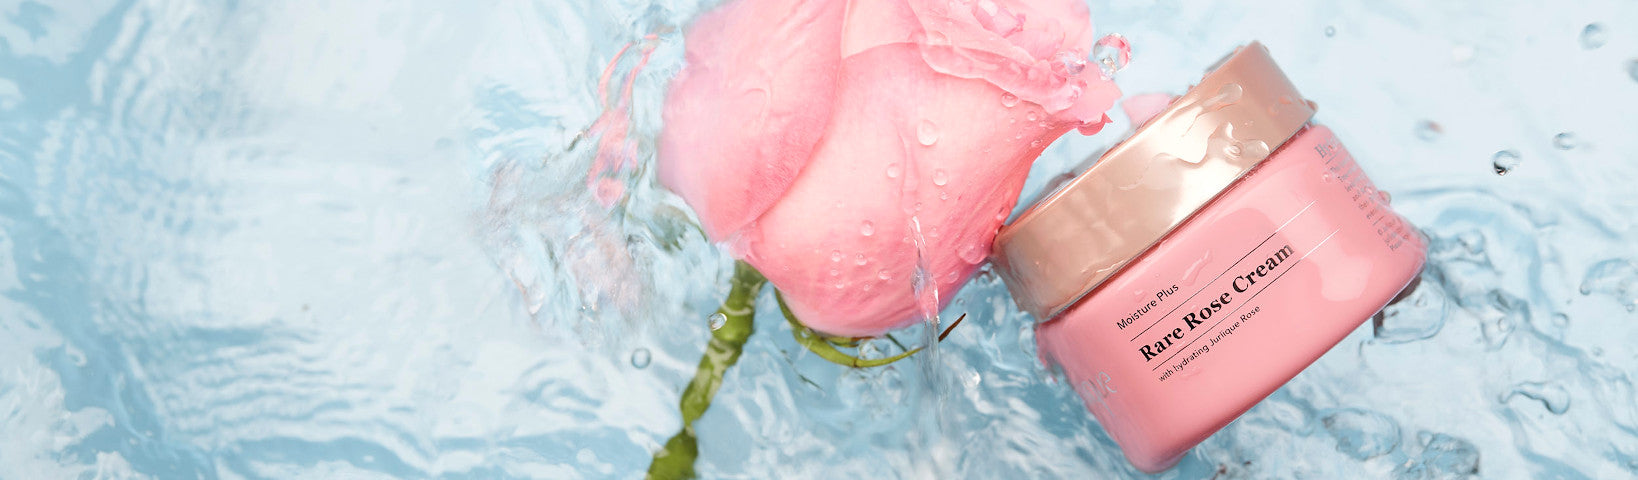 WHY YOU SHOULD USE ROSE-INFUSED SKIN CARE PRODUCTS